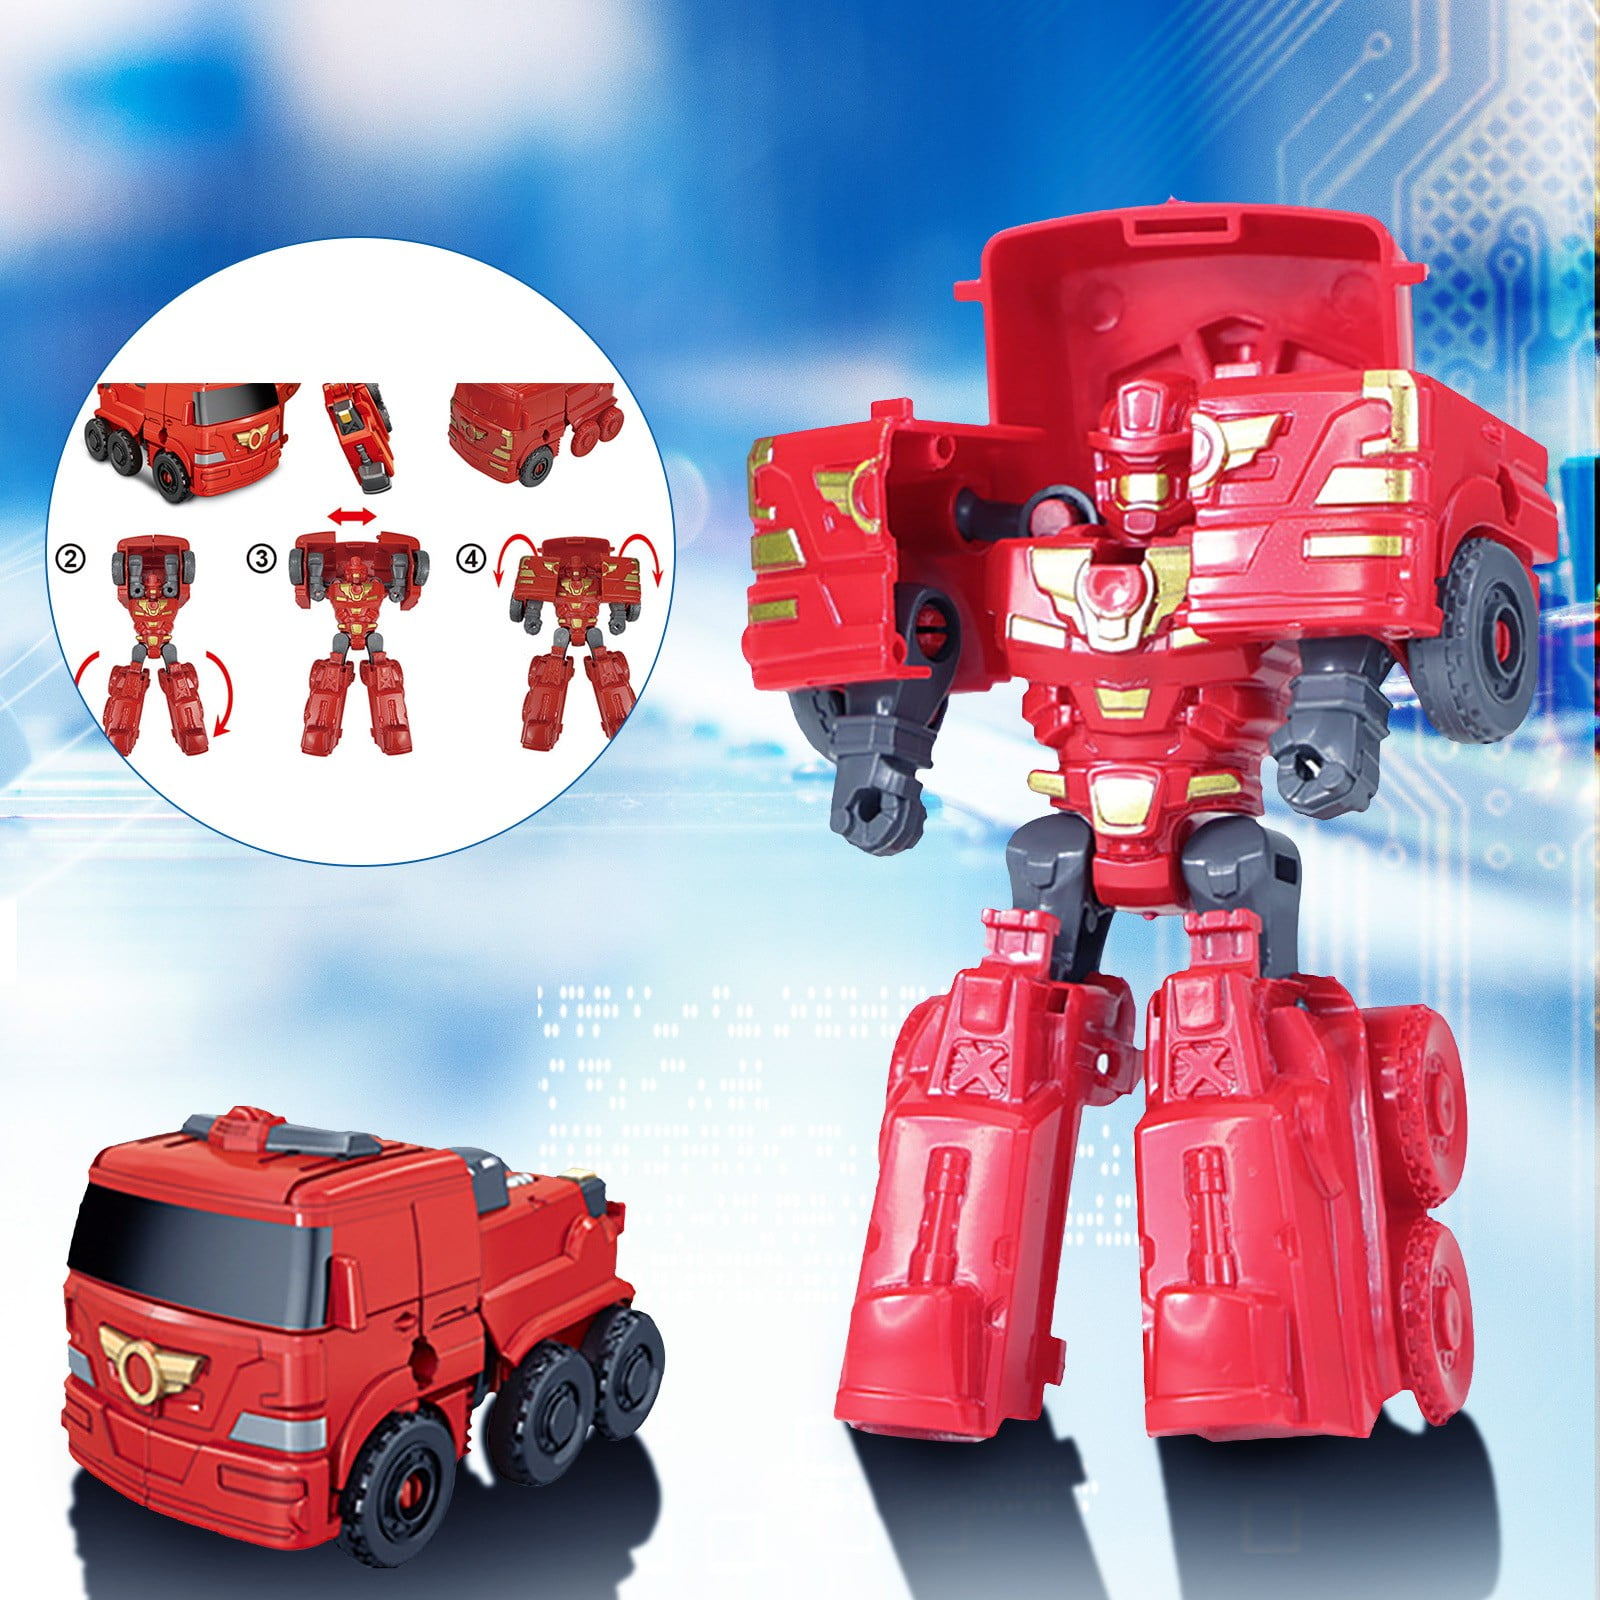 HTTDD Deformation Toys Skipjack Kids Deformation Robot Action Figure as Gift for Boys and Girls Suitable for Children and Adults Toy Trucks